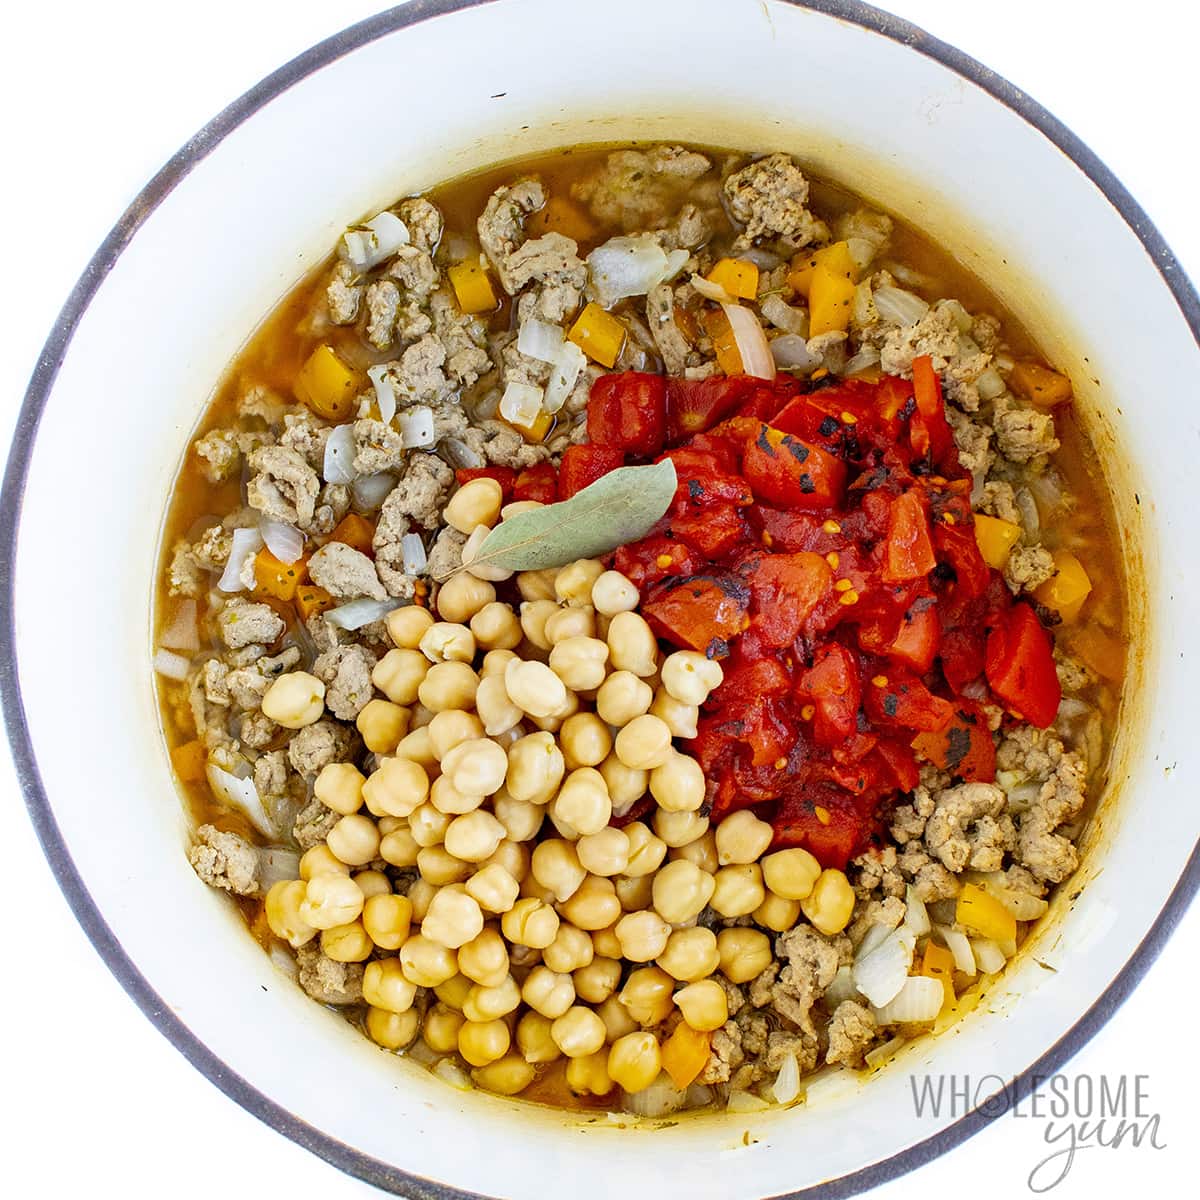 Roasted tomatoes and chickpeas are roasted with cooked turkey in a Dutch oven.